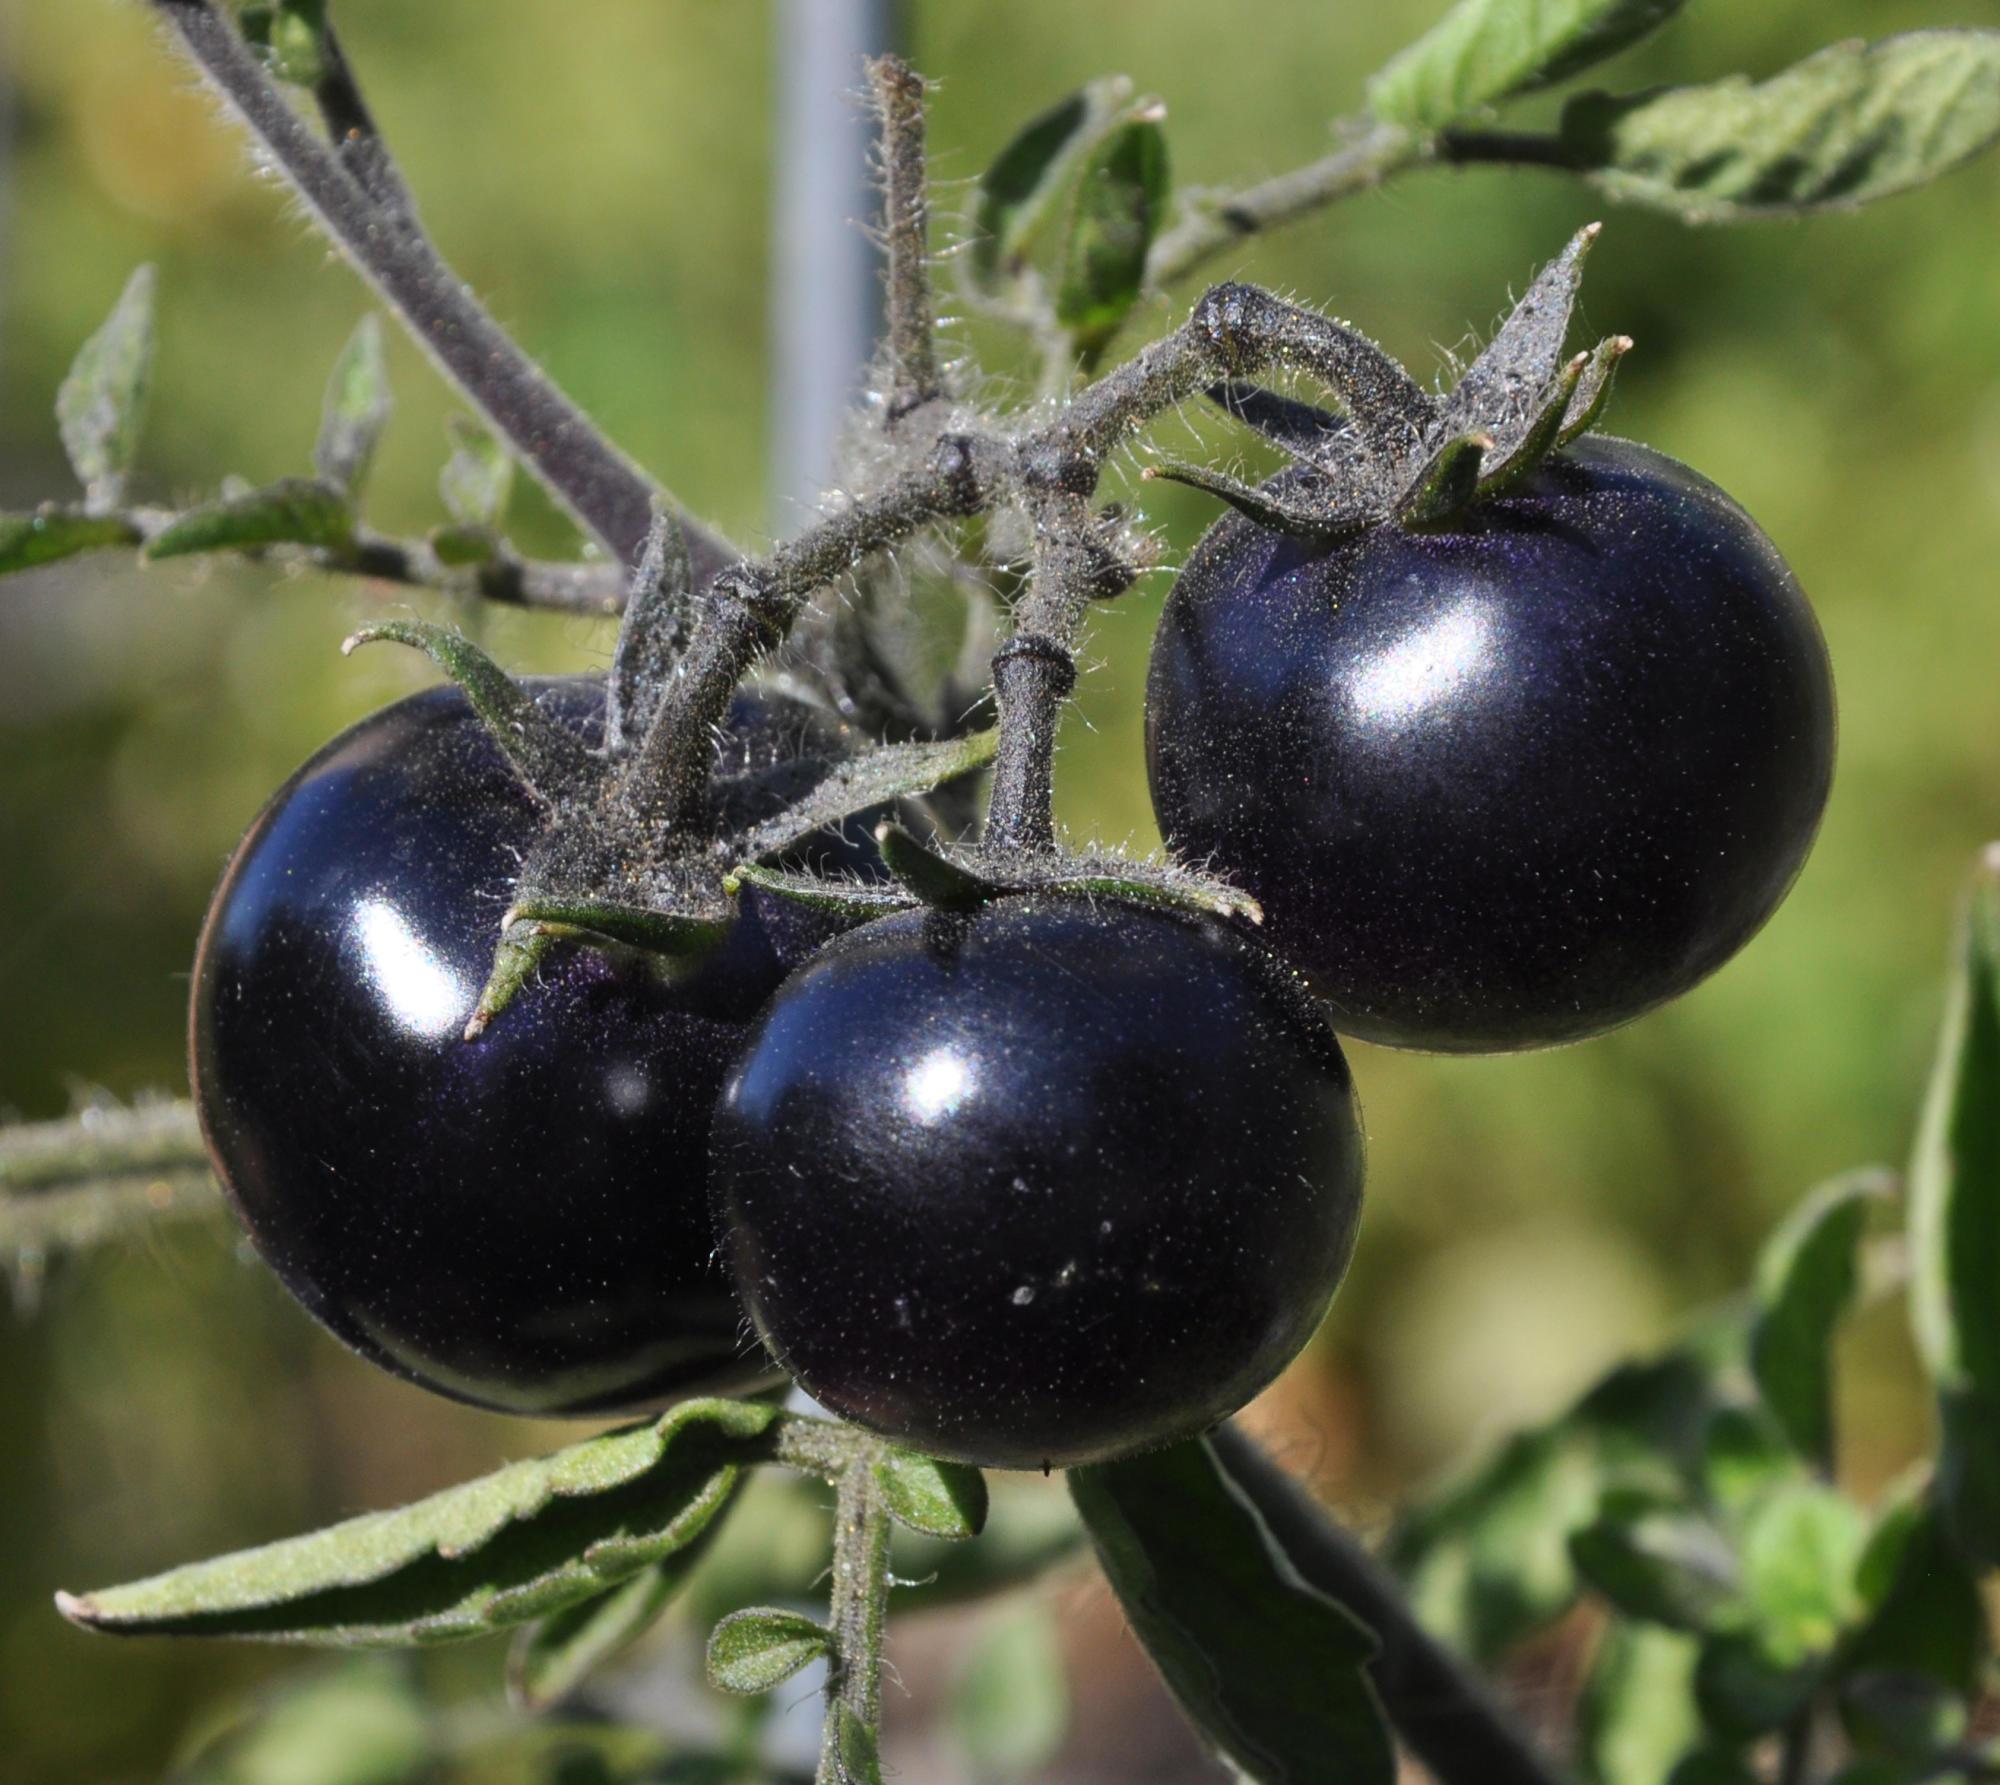 Indigo Rose tomates grow in a garden in Corvallis. The variety was developed by Jim Myers, a vegetable breeder at Oregon State University.